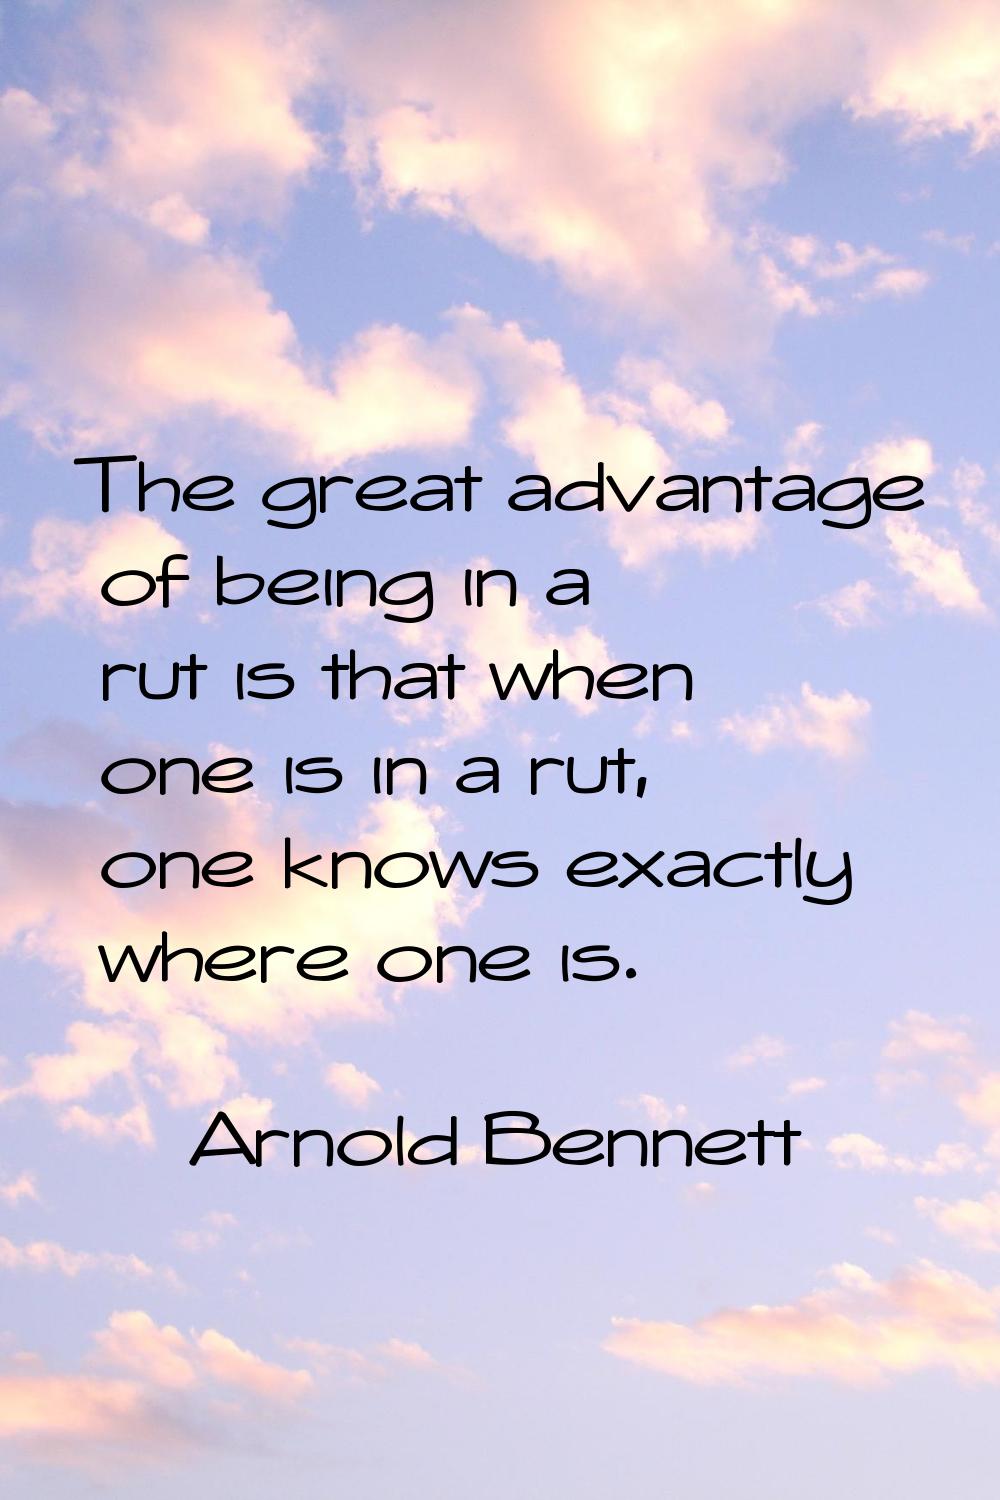 The great advantage of being in a rut is that when one is in a rut, one knows exactly where one is.